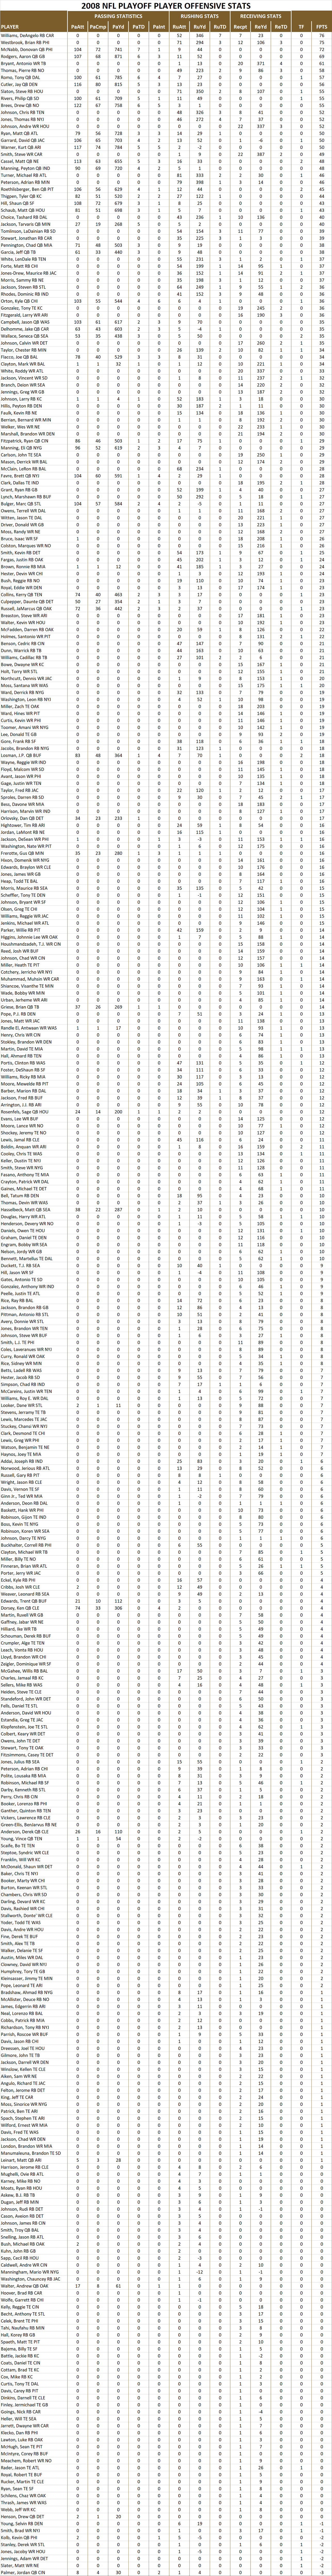 2008 National Football League Pool Playoff Player Offensive Stats